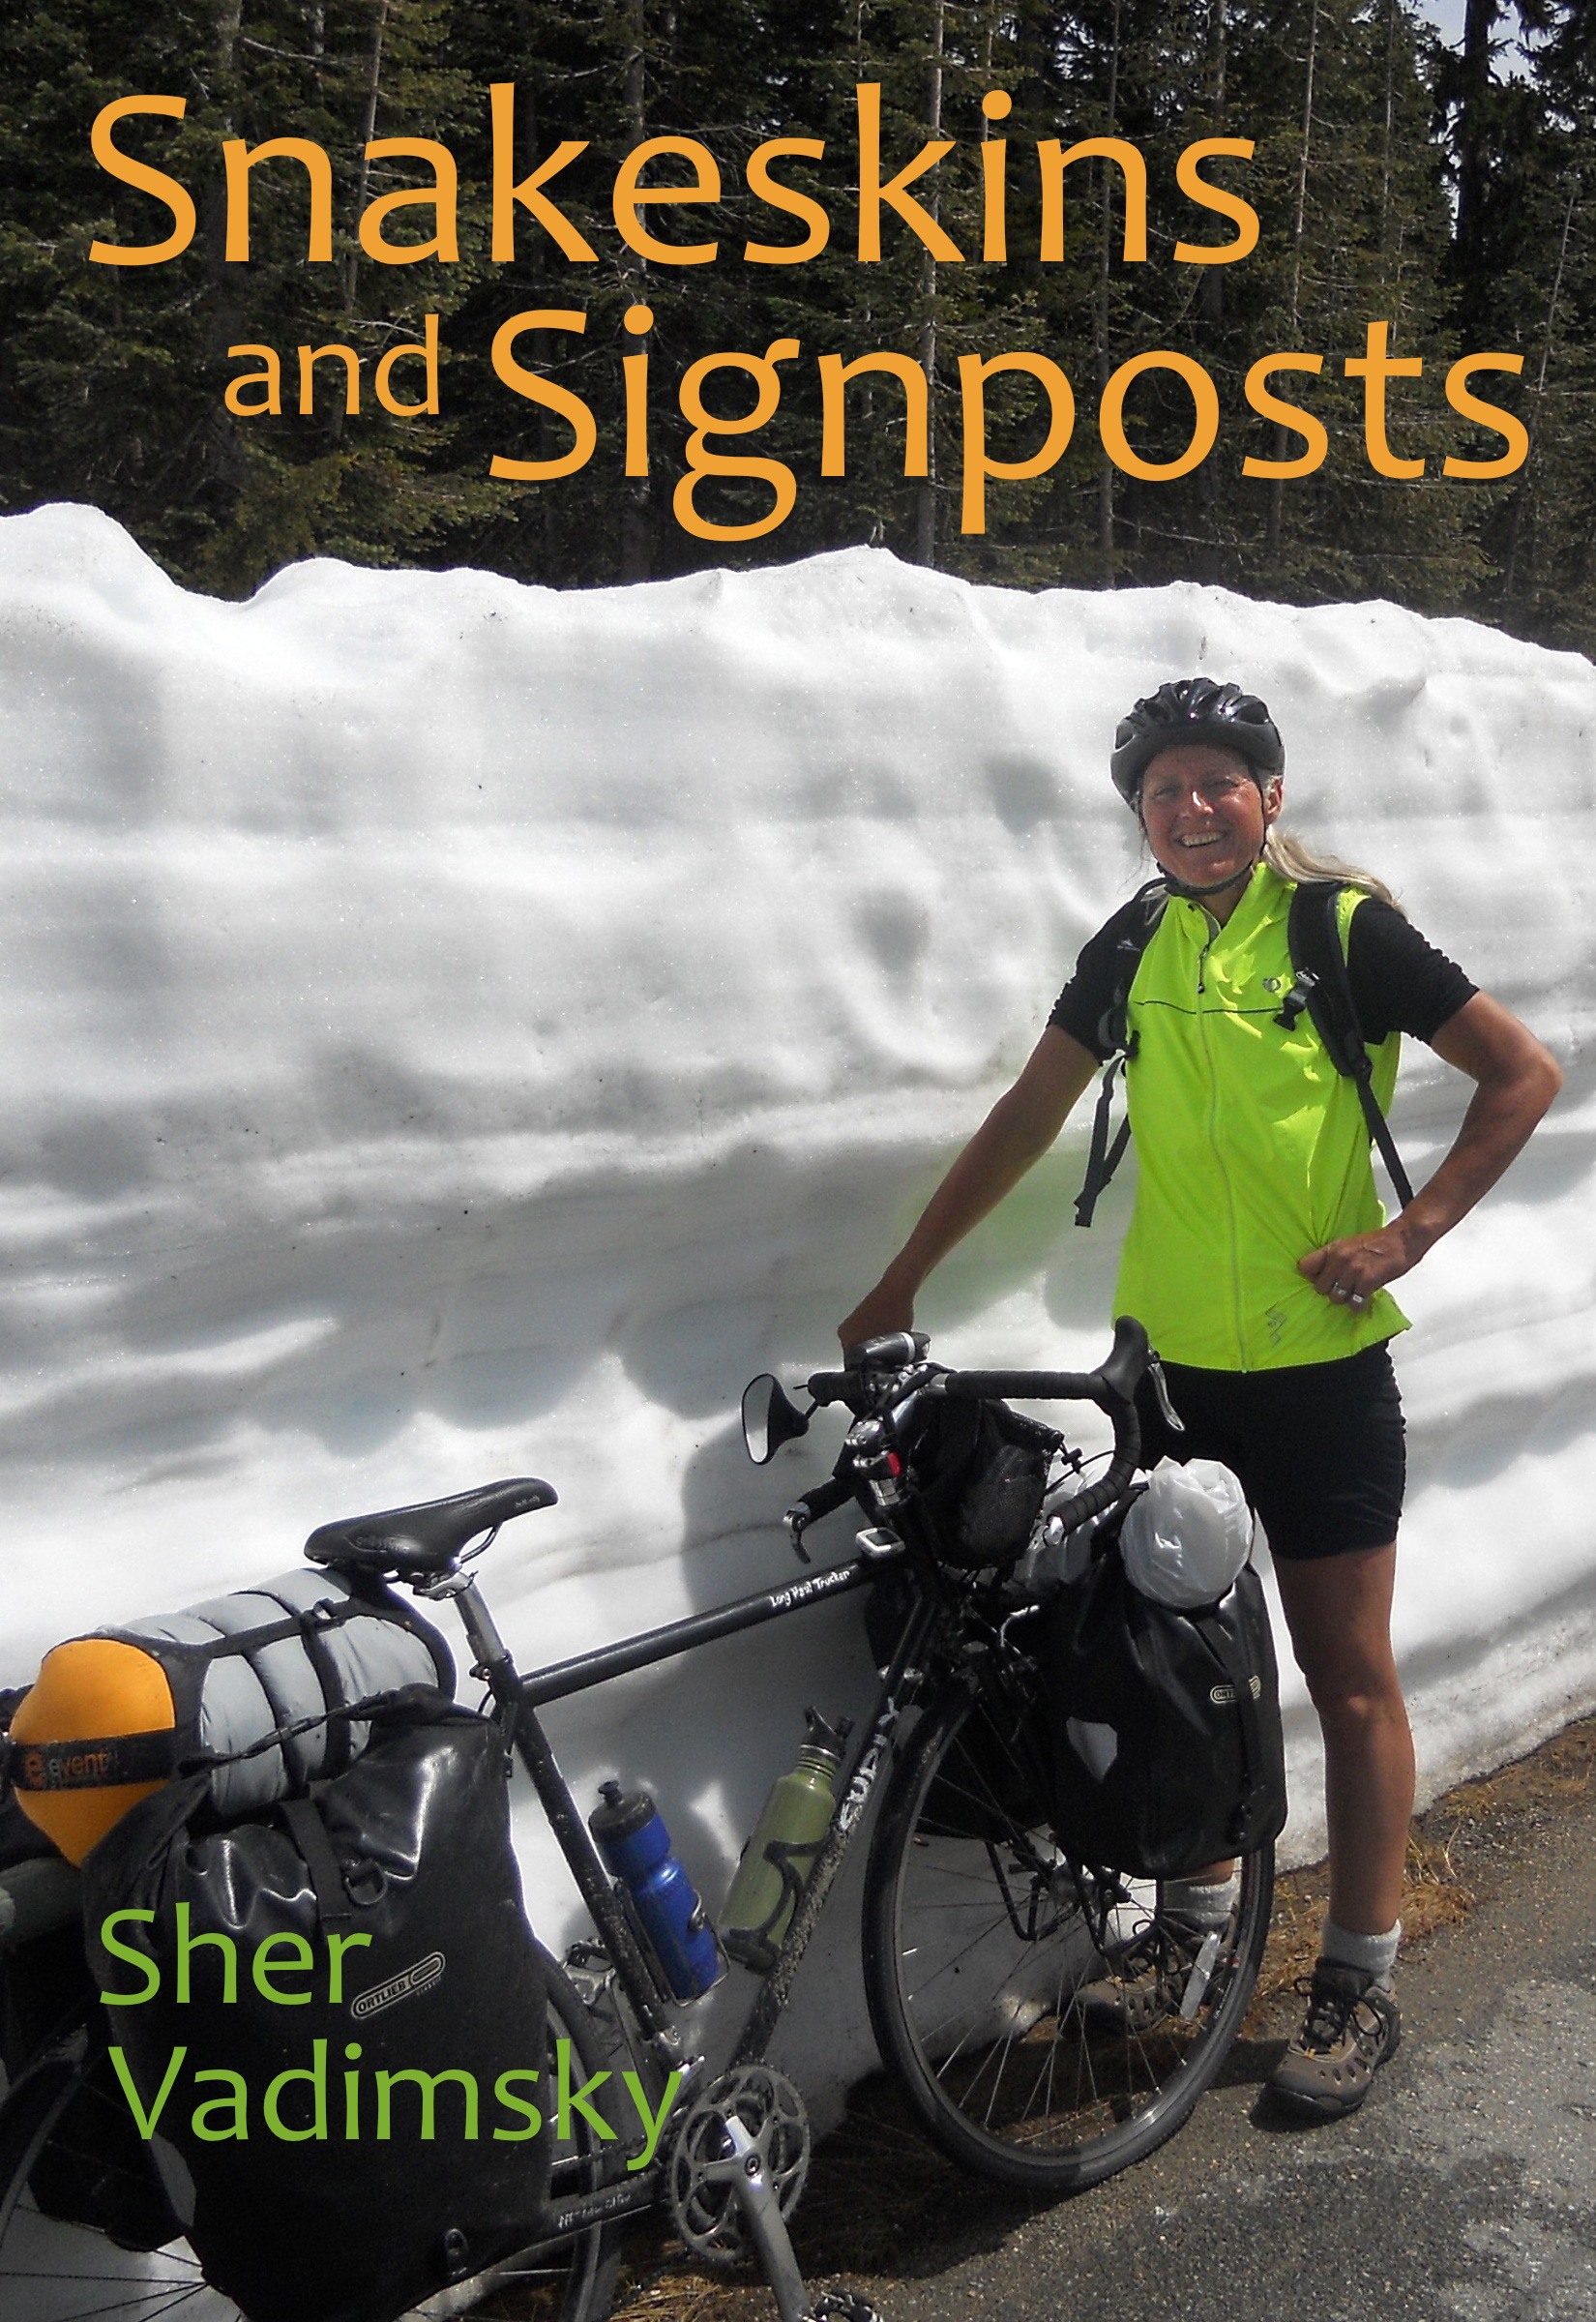 book cover "Snakeskins and Signposts" photograph depicting bicyclist wearing black bike shorts, yellow vest and helmet, standing next to bicycle and a wall of snow.